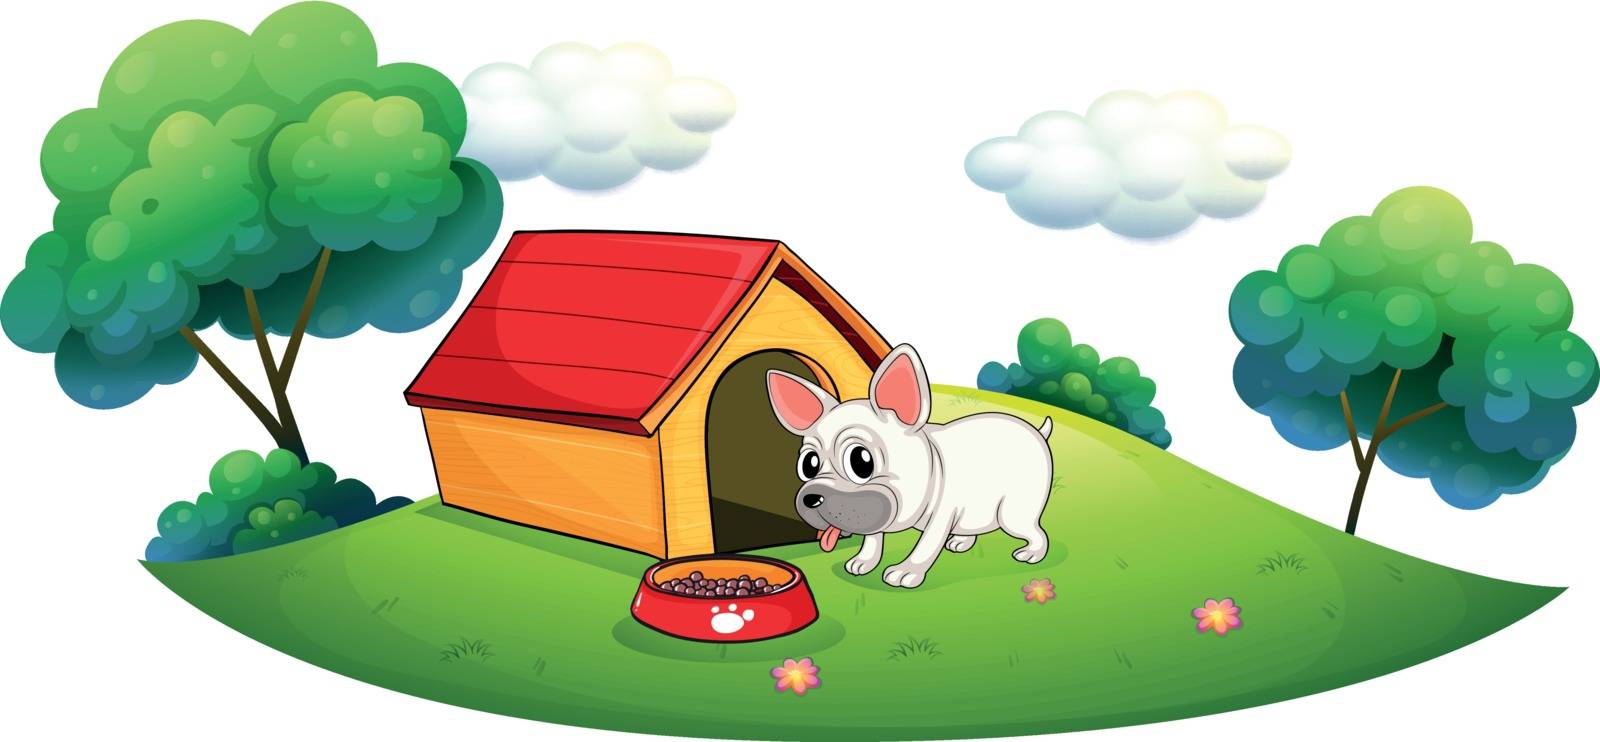 Illustration of a doghouse and a dog in an island on a white background